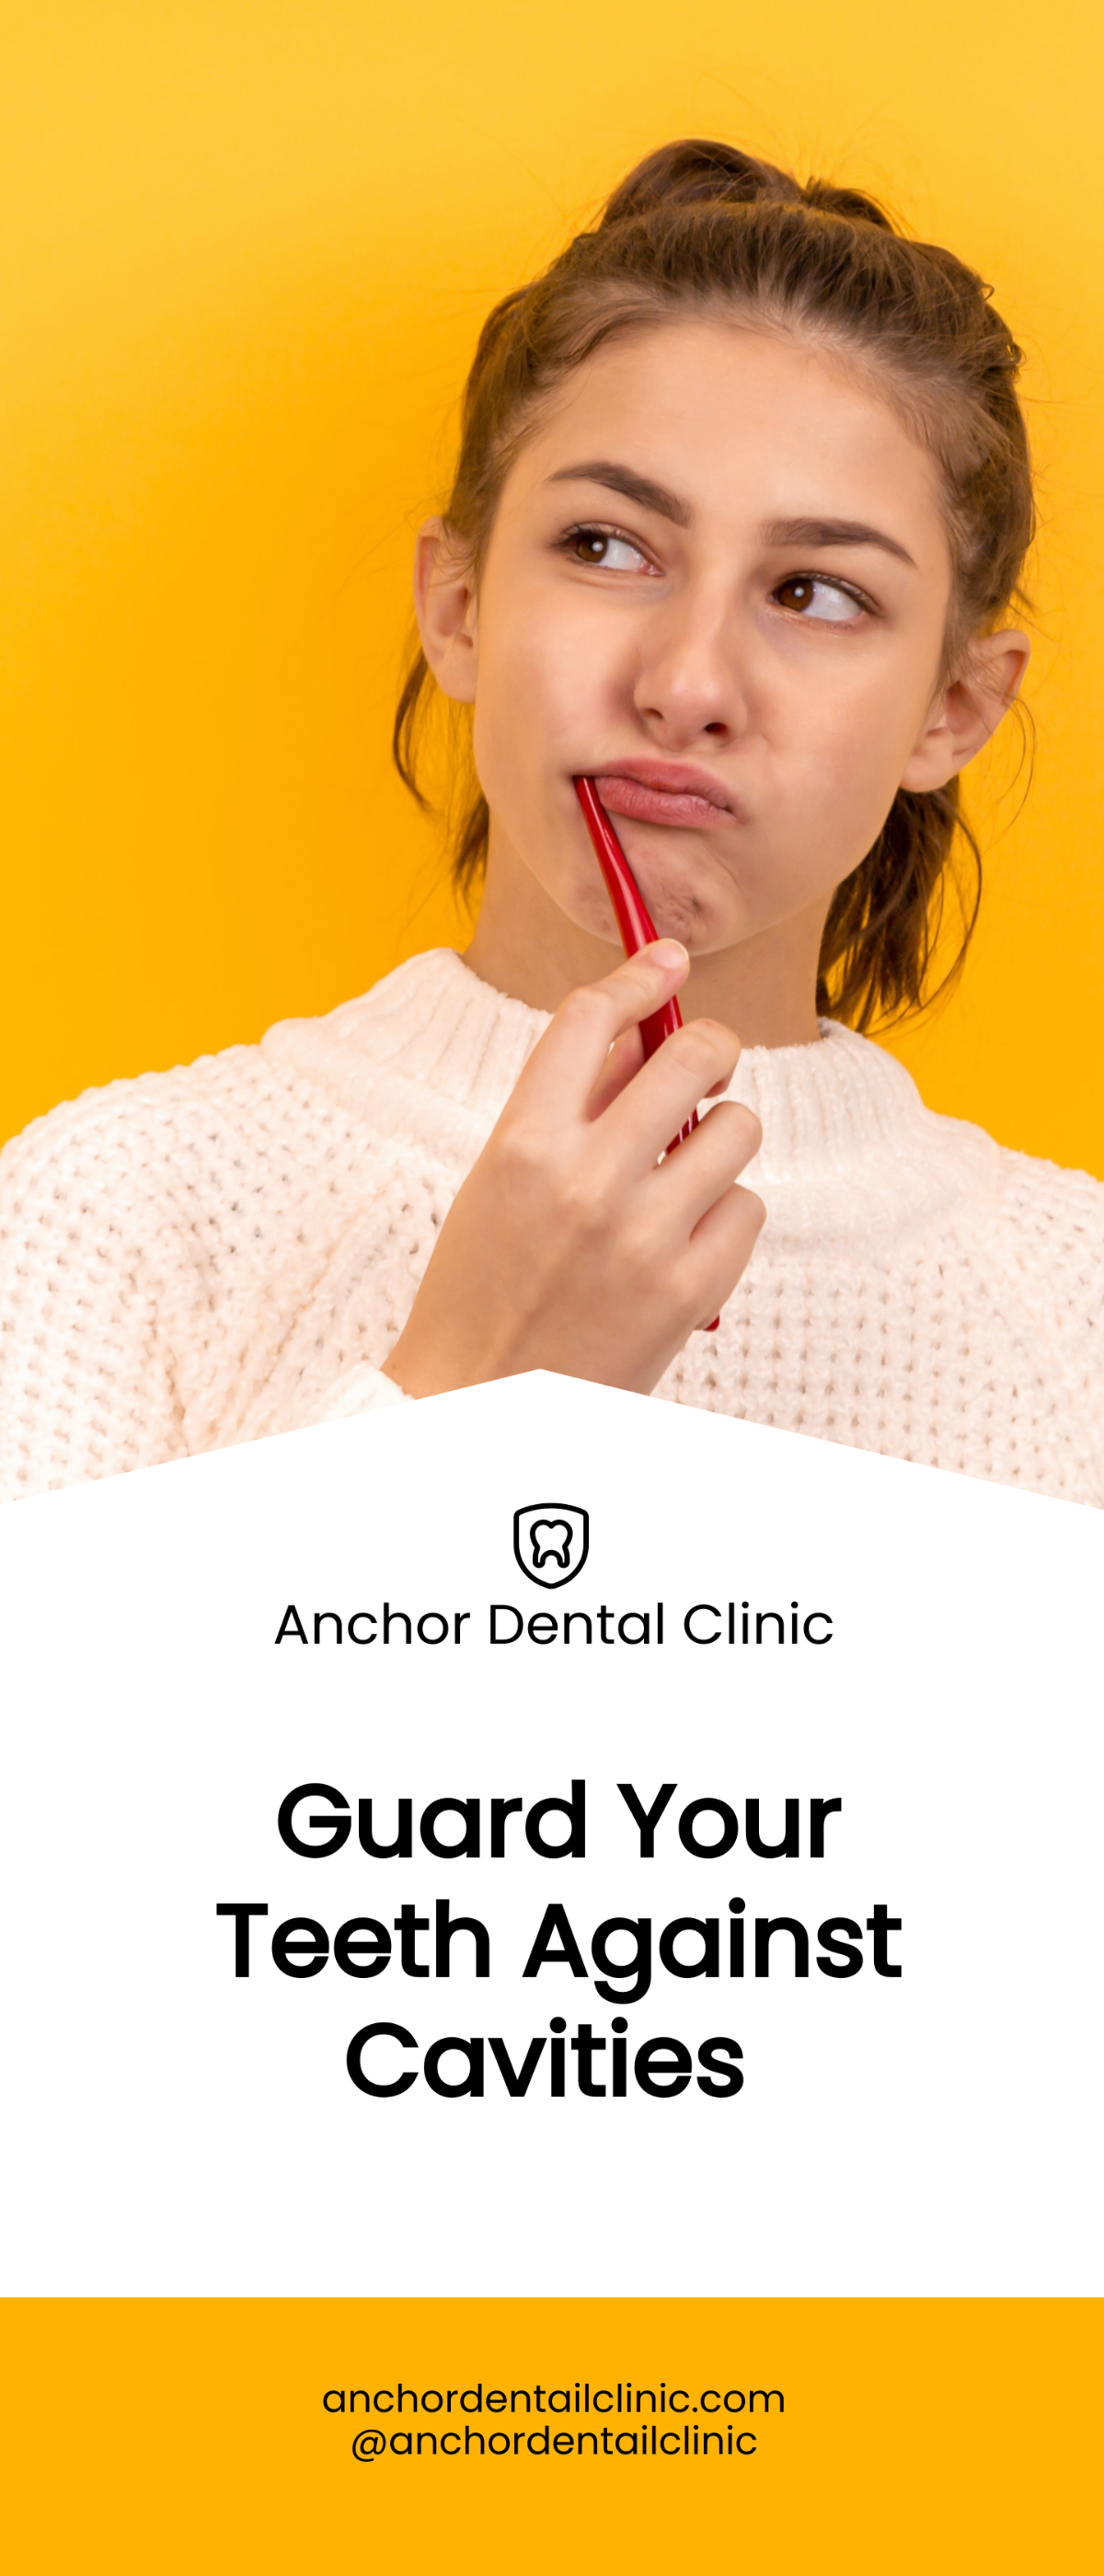 Free Dental Guard Medical Roll Up Banner Template